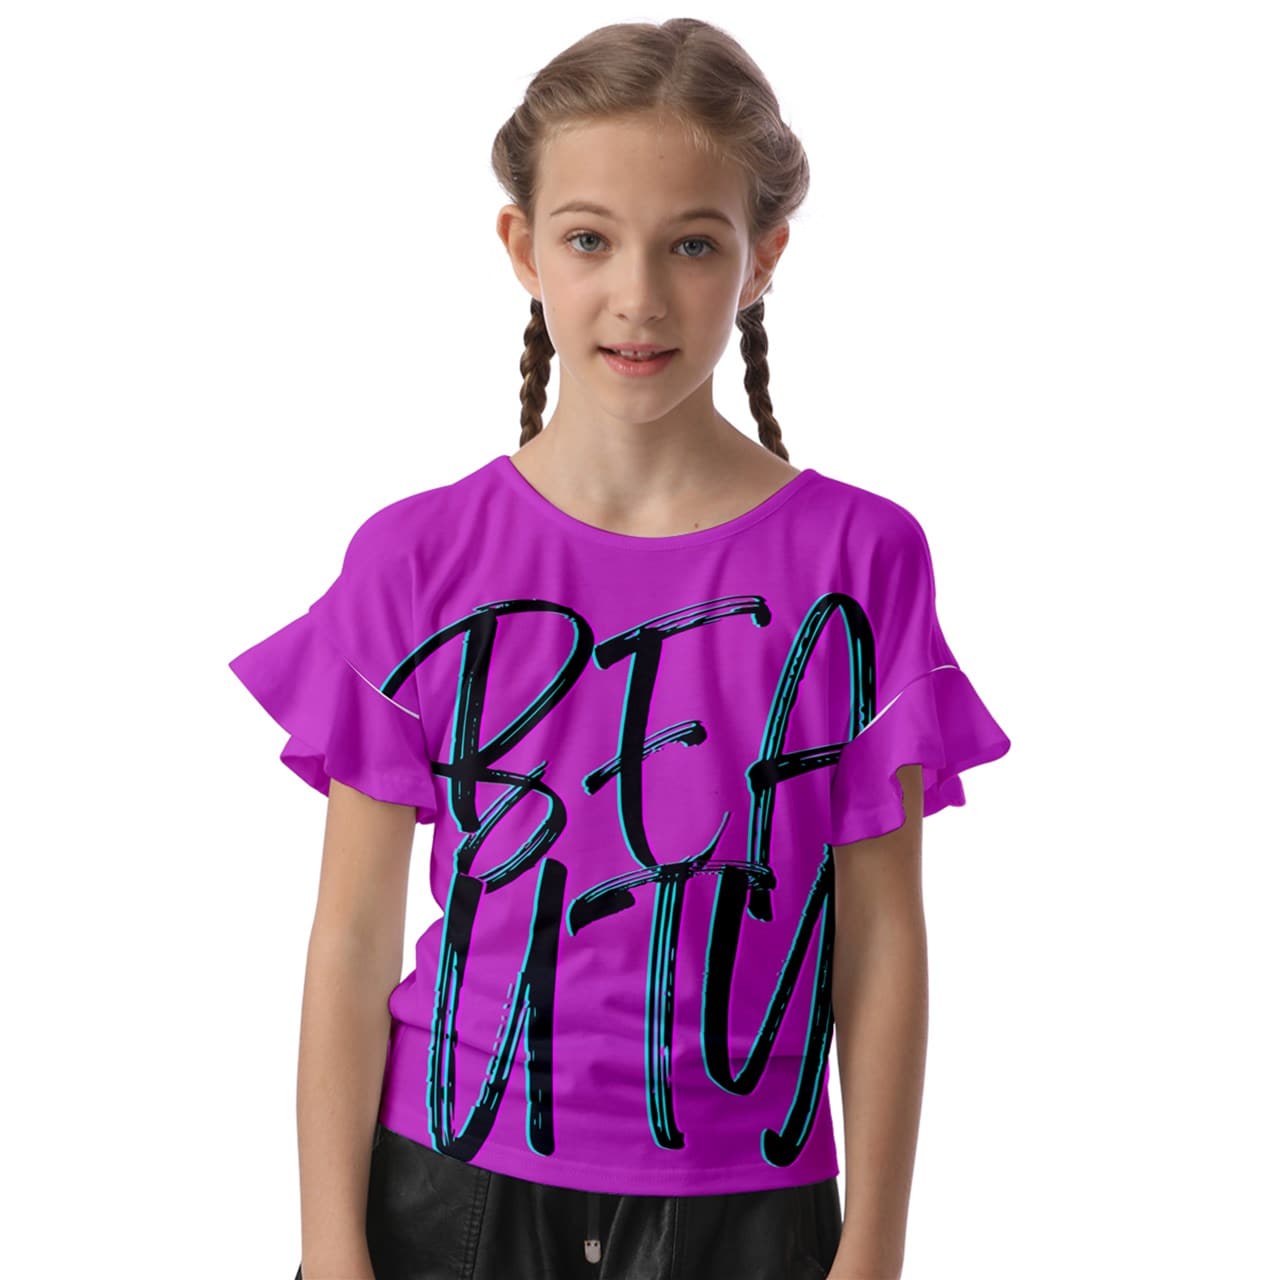 Beauty Kids' Flutter Sleeve Top - kid's top at TFC&H Co.